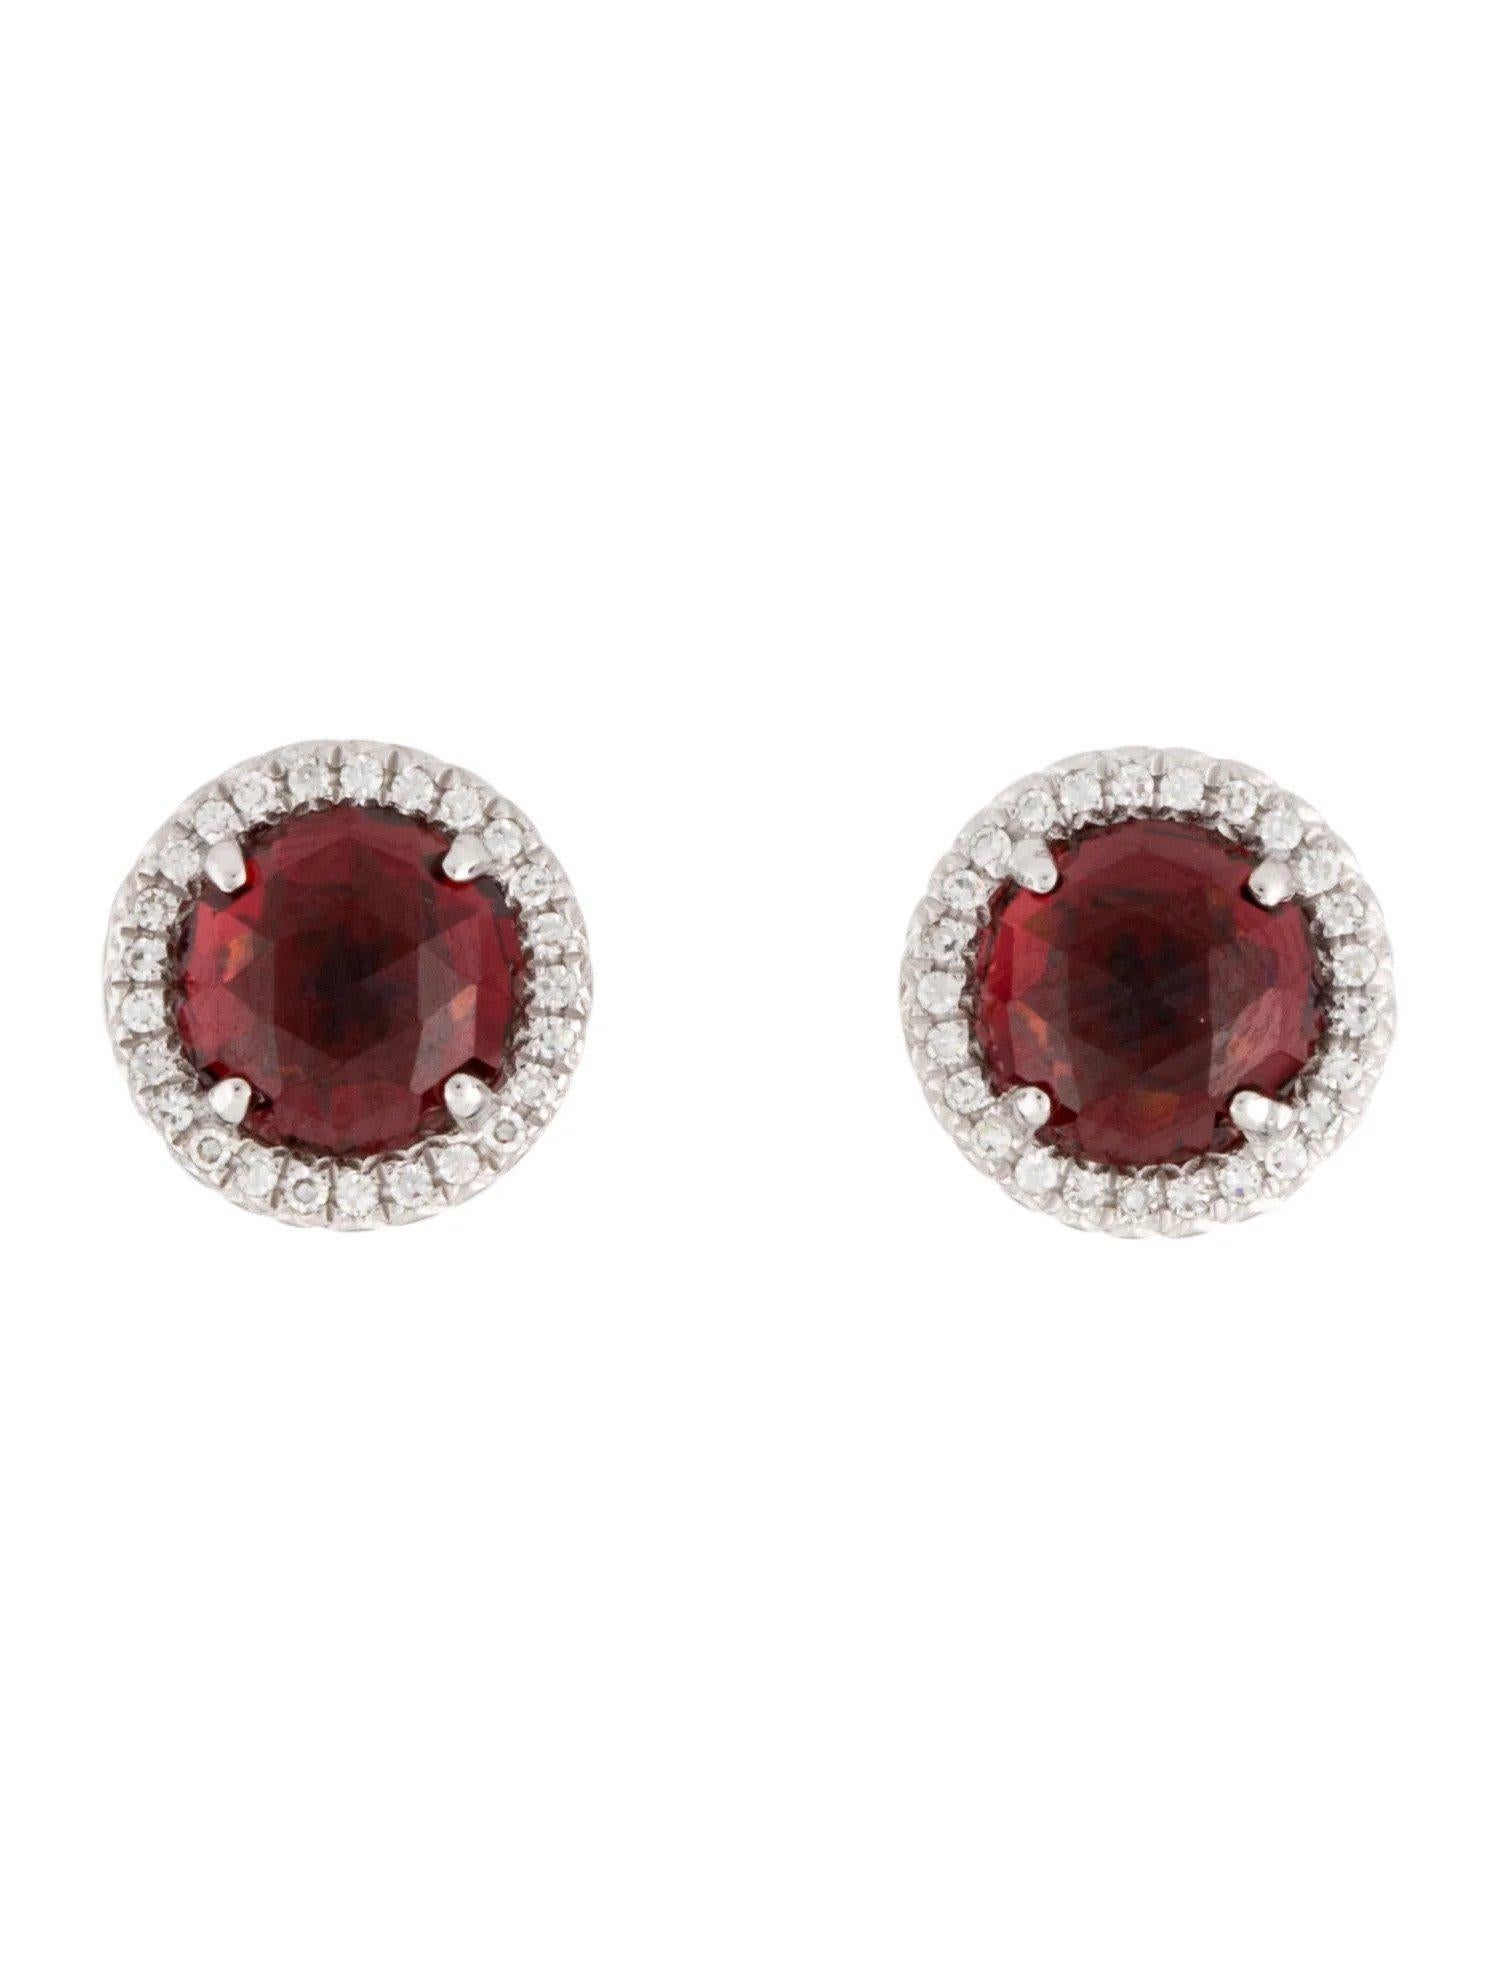 These Garnet & Diamond Earrings are a stunning and timeless accessory that can add a touch of glamour and sophistication to any outfit. 

These earrings each feature a 1.50 Carat Round Garnet , with a Diamond Halo comprised of 0.06 Carats of Single